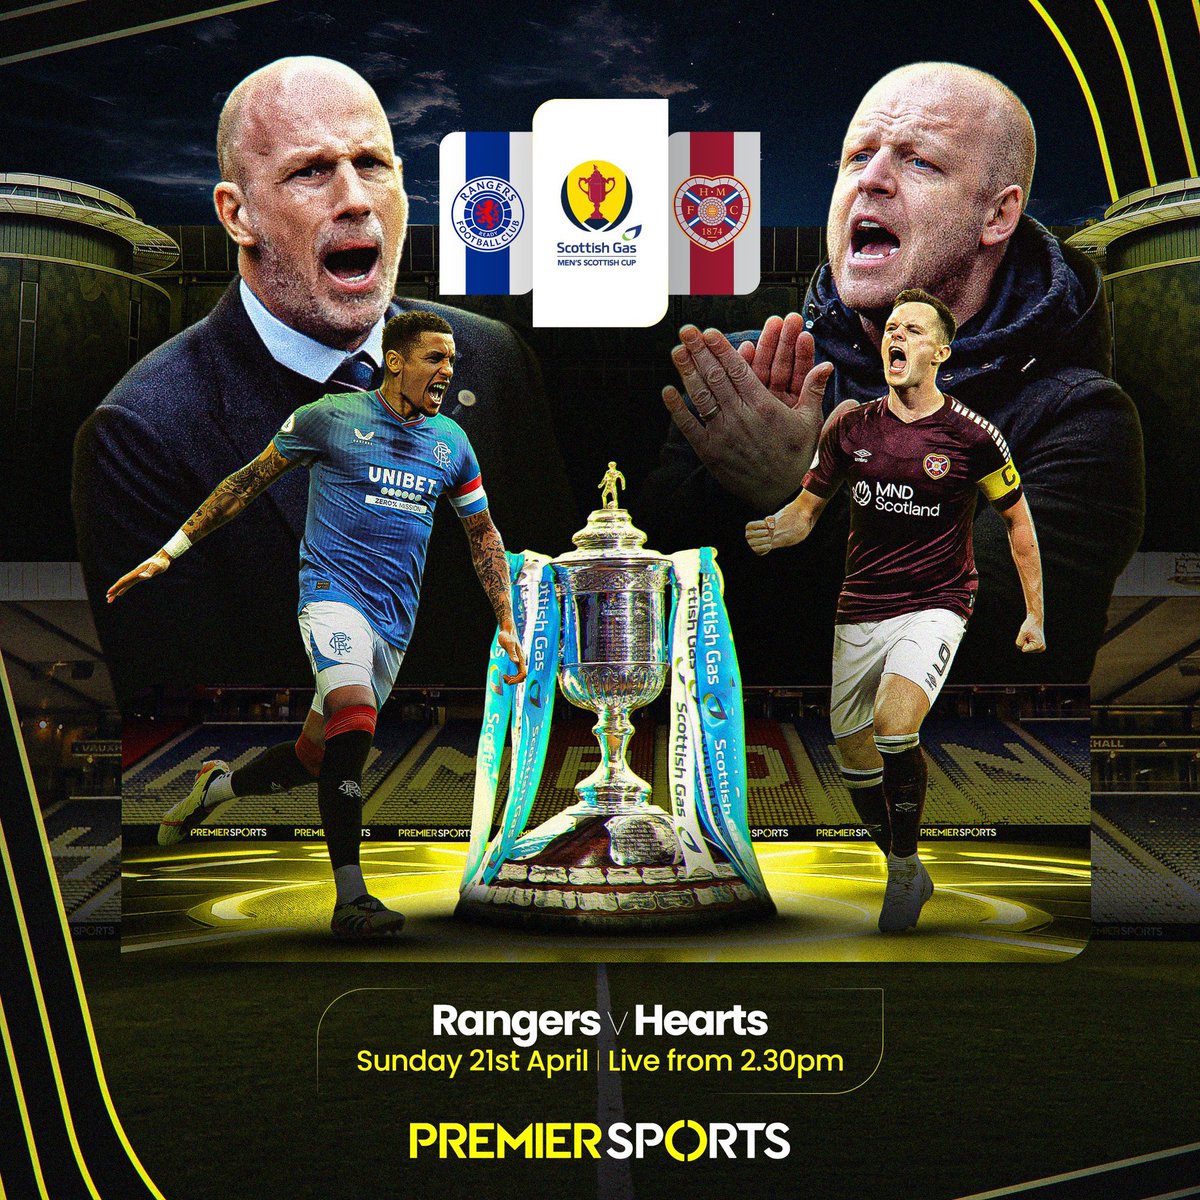 Hearts and Rangers meet at Hampden for the second time this season ⚔️ The winner of the tie will face Celtic in the Scottish Cup Final next month 🏆 Watch our live coverage of the game from 2.30pm on Premier Sports 2 📺 #ScottishCup